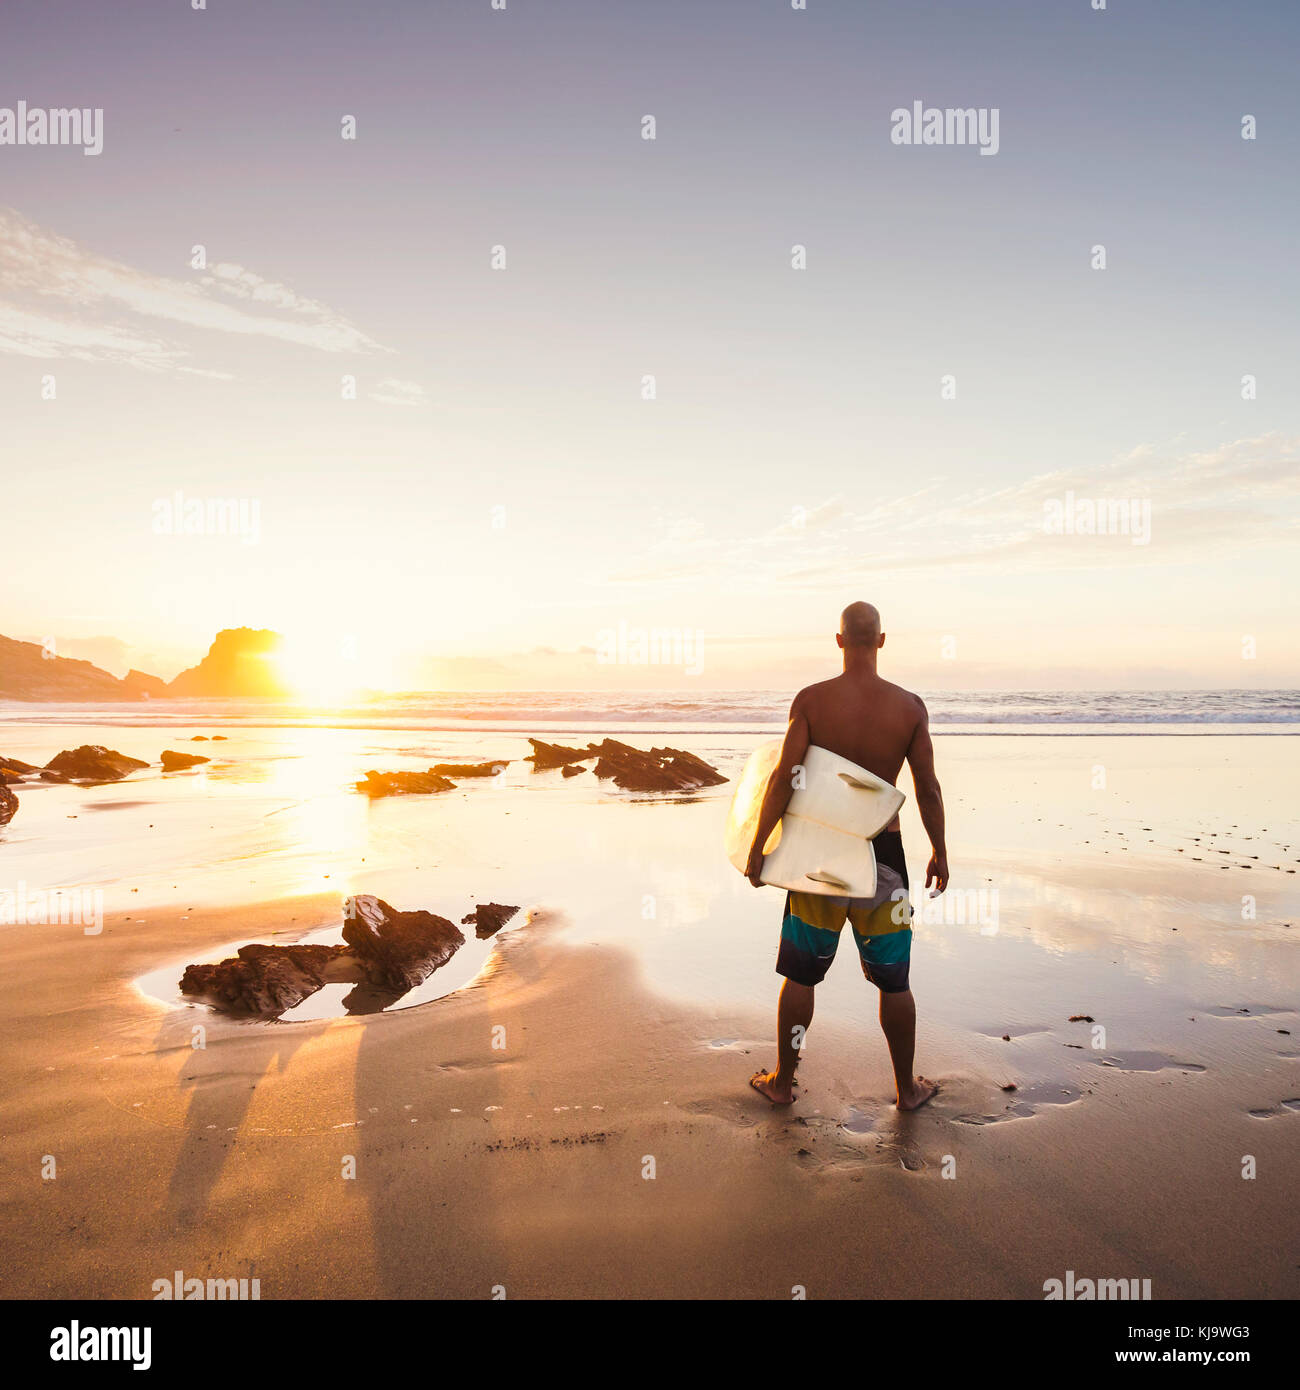 Silhouette Of A Surfer Man At The Beach With His Surfboard Stock Photo